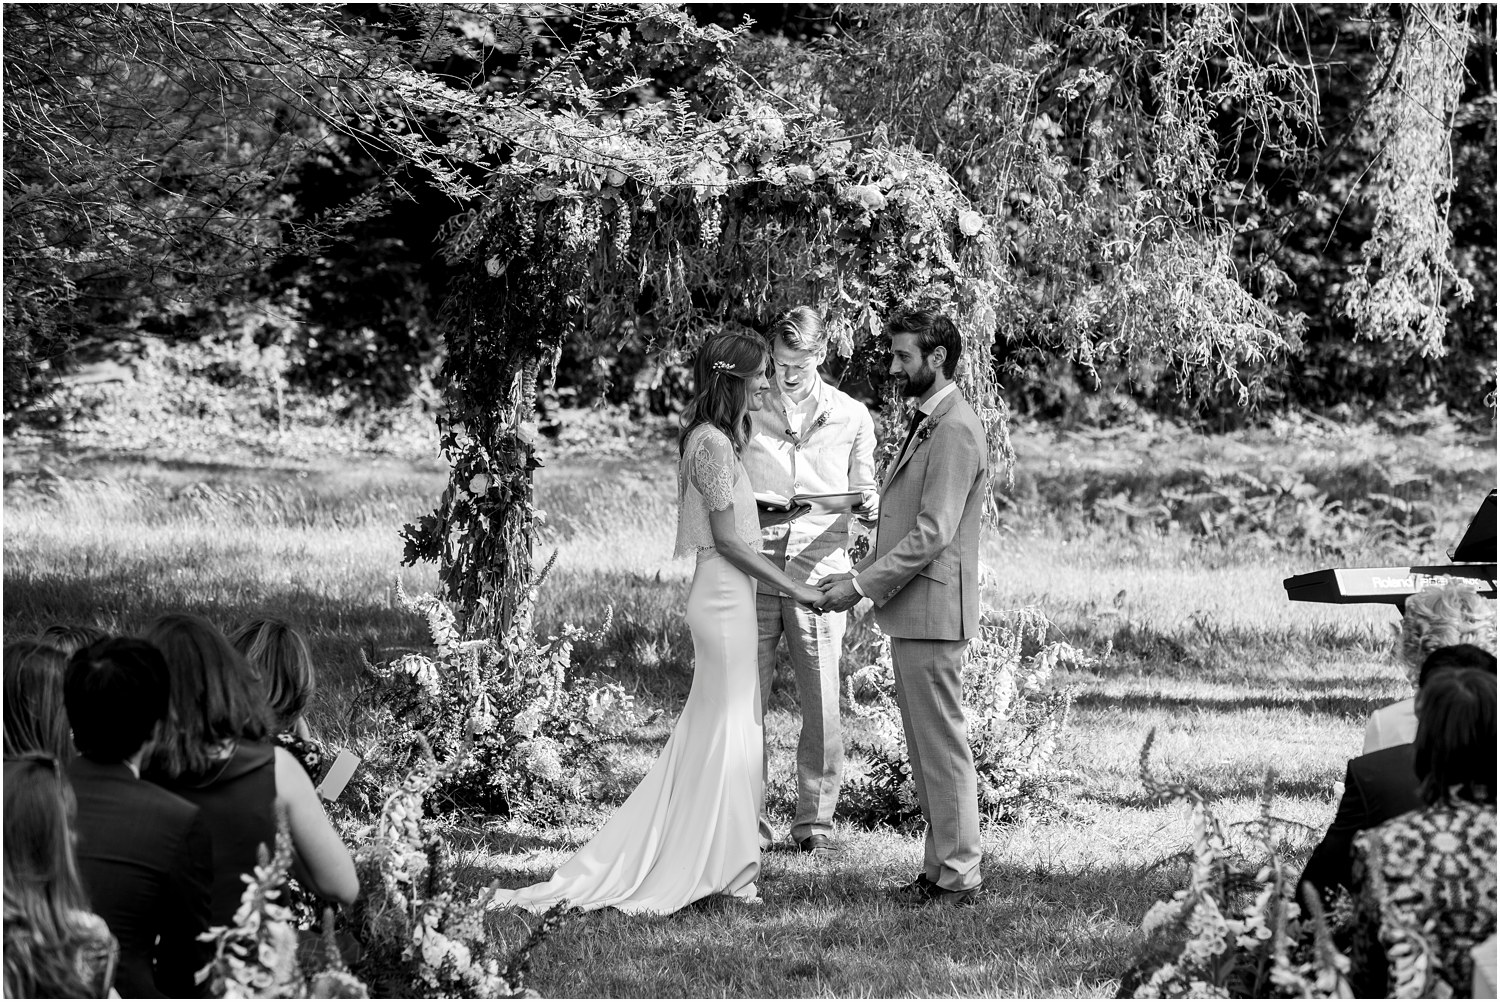 getting married by lake in woods in sussex